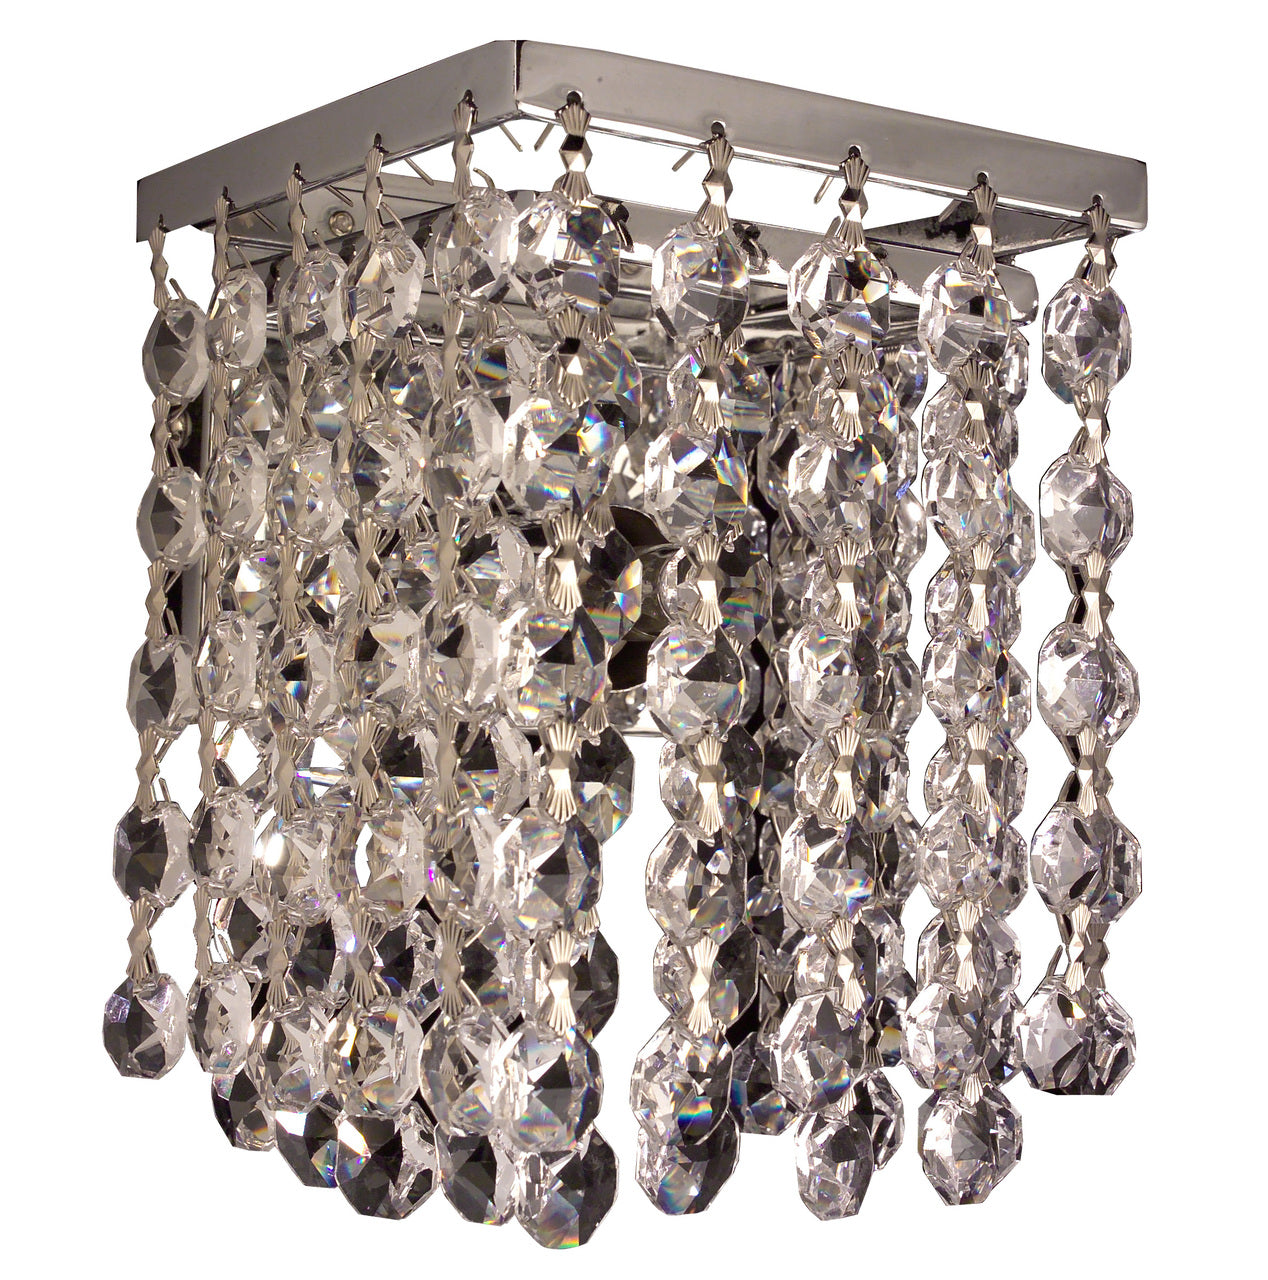 Classic Lighting 16102 CGT-CP Bedazzle Crystal Wall Sconce in Chrome